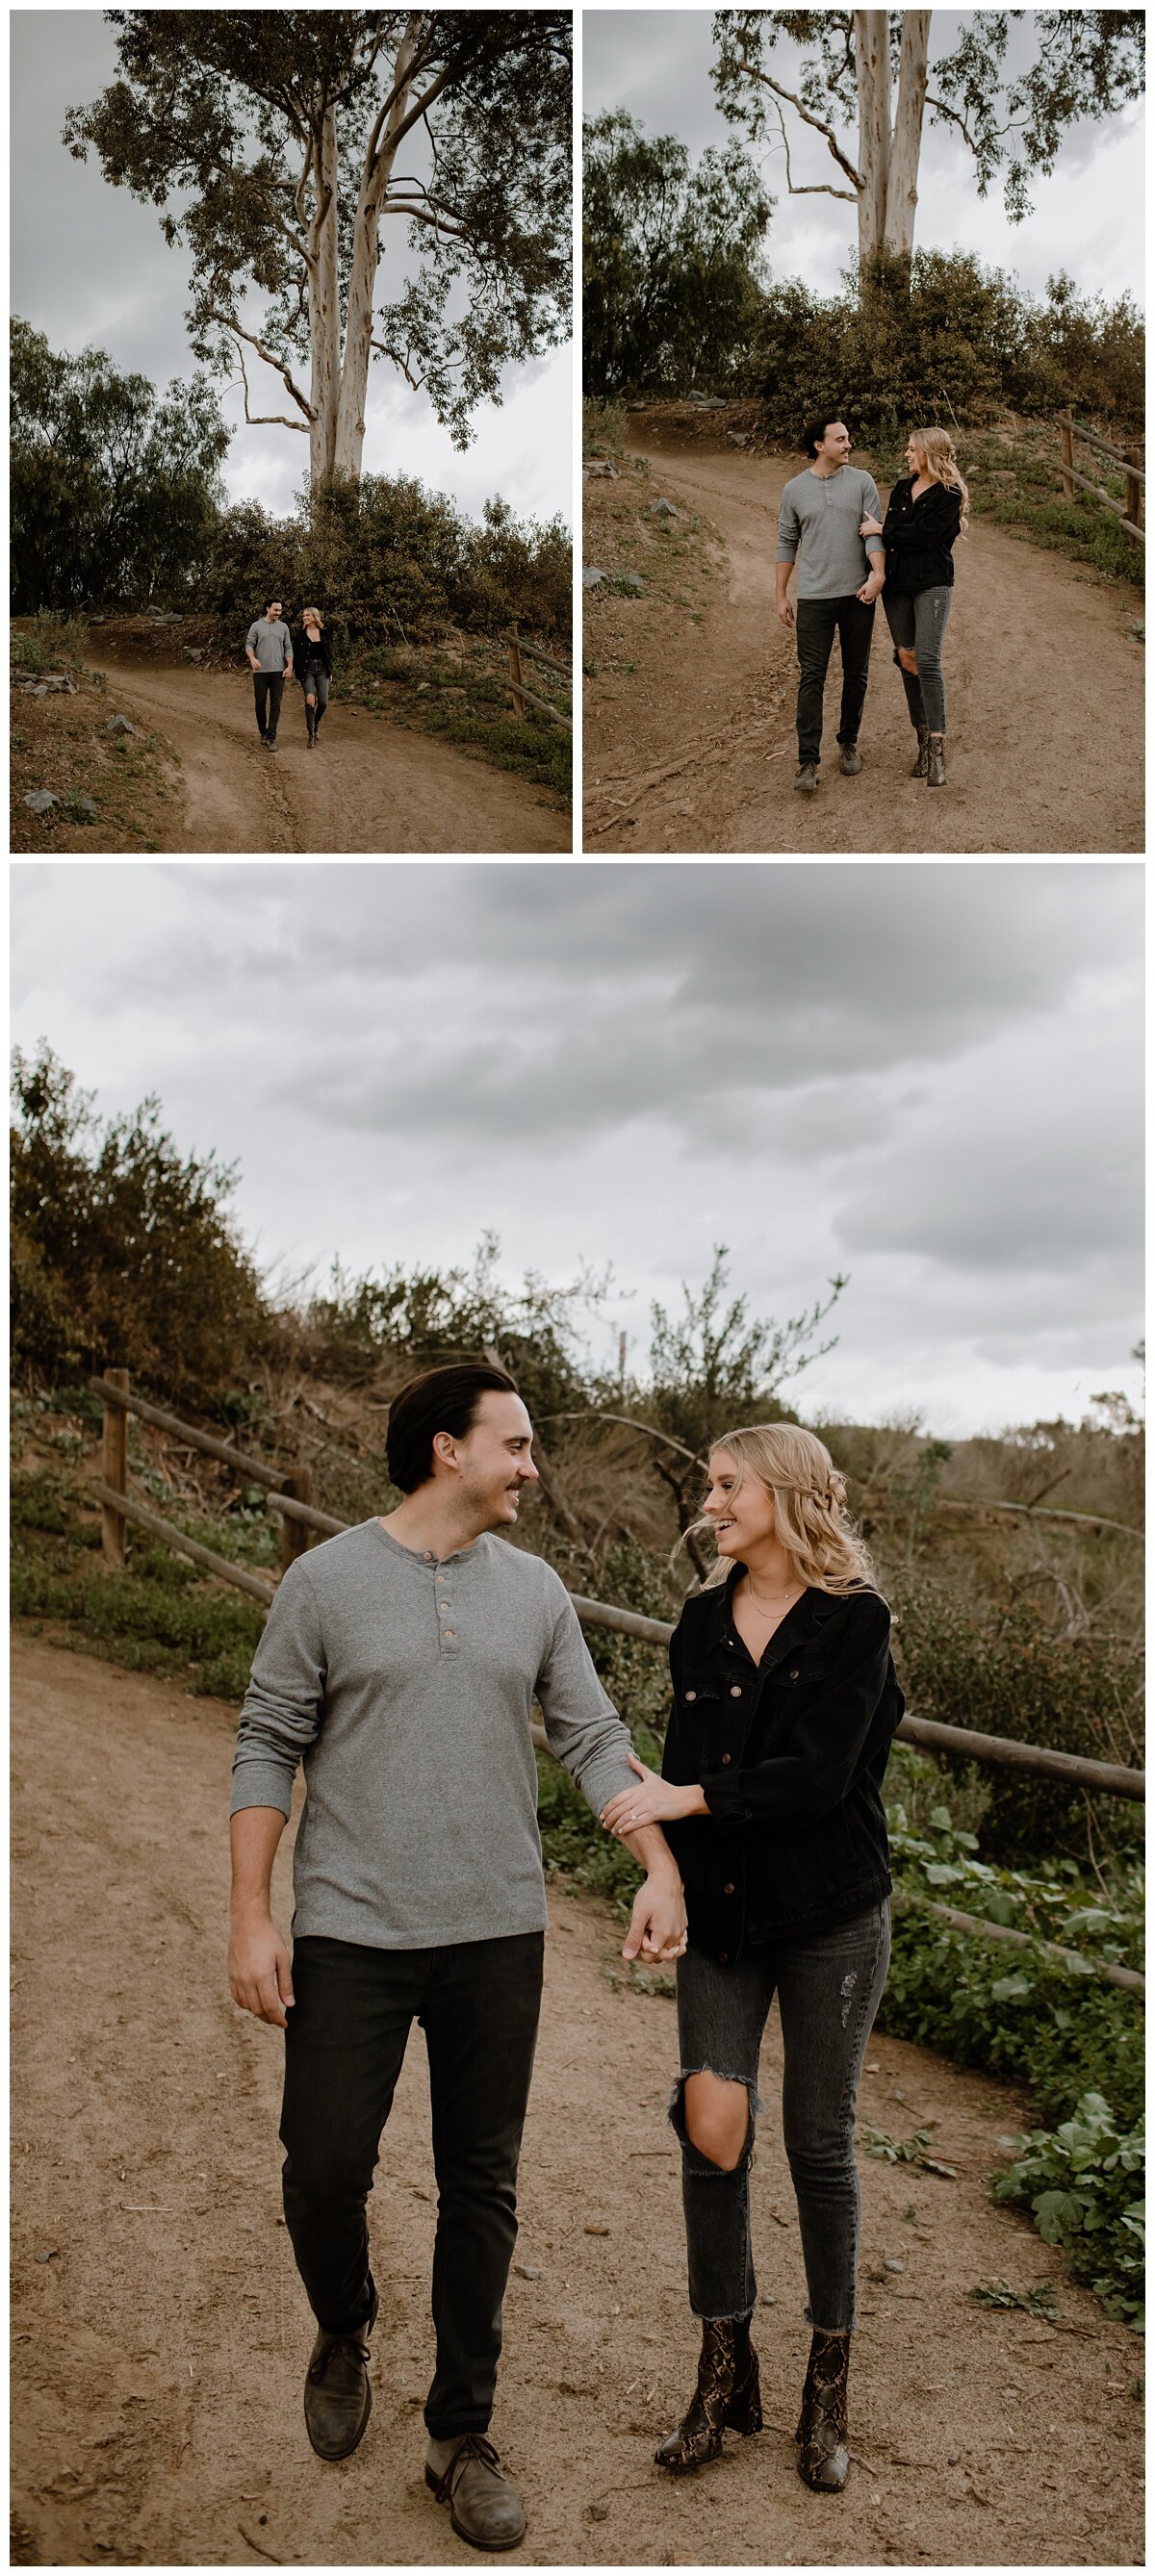 Carbon Canyon Park Orange County - Madeline and Scott Engagement Session - Eve Rox Photography-1_WEB.jpg